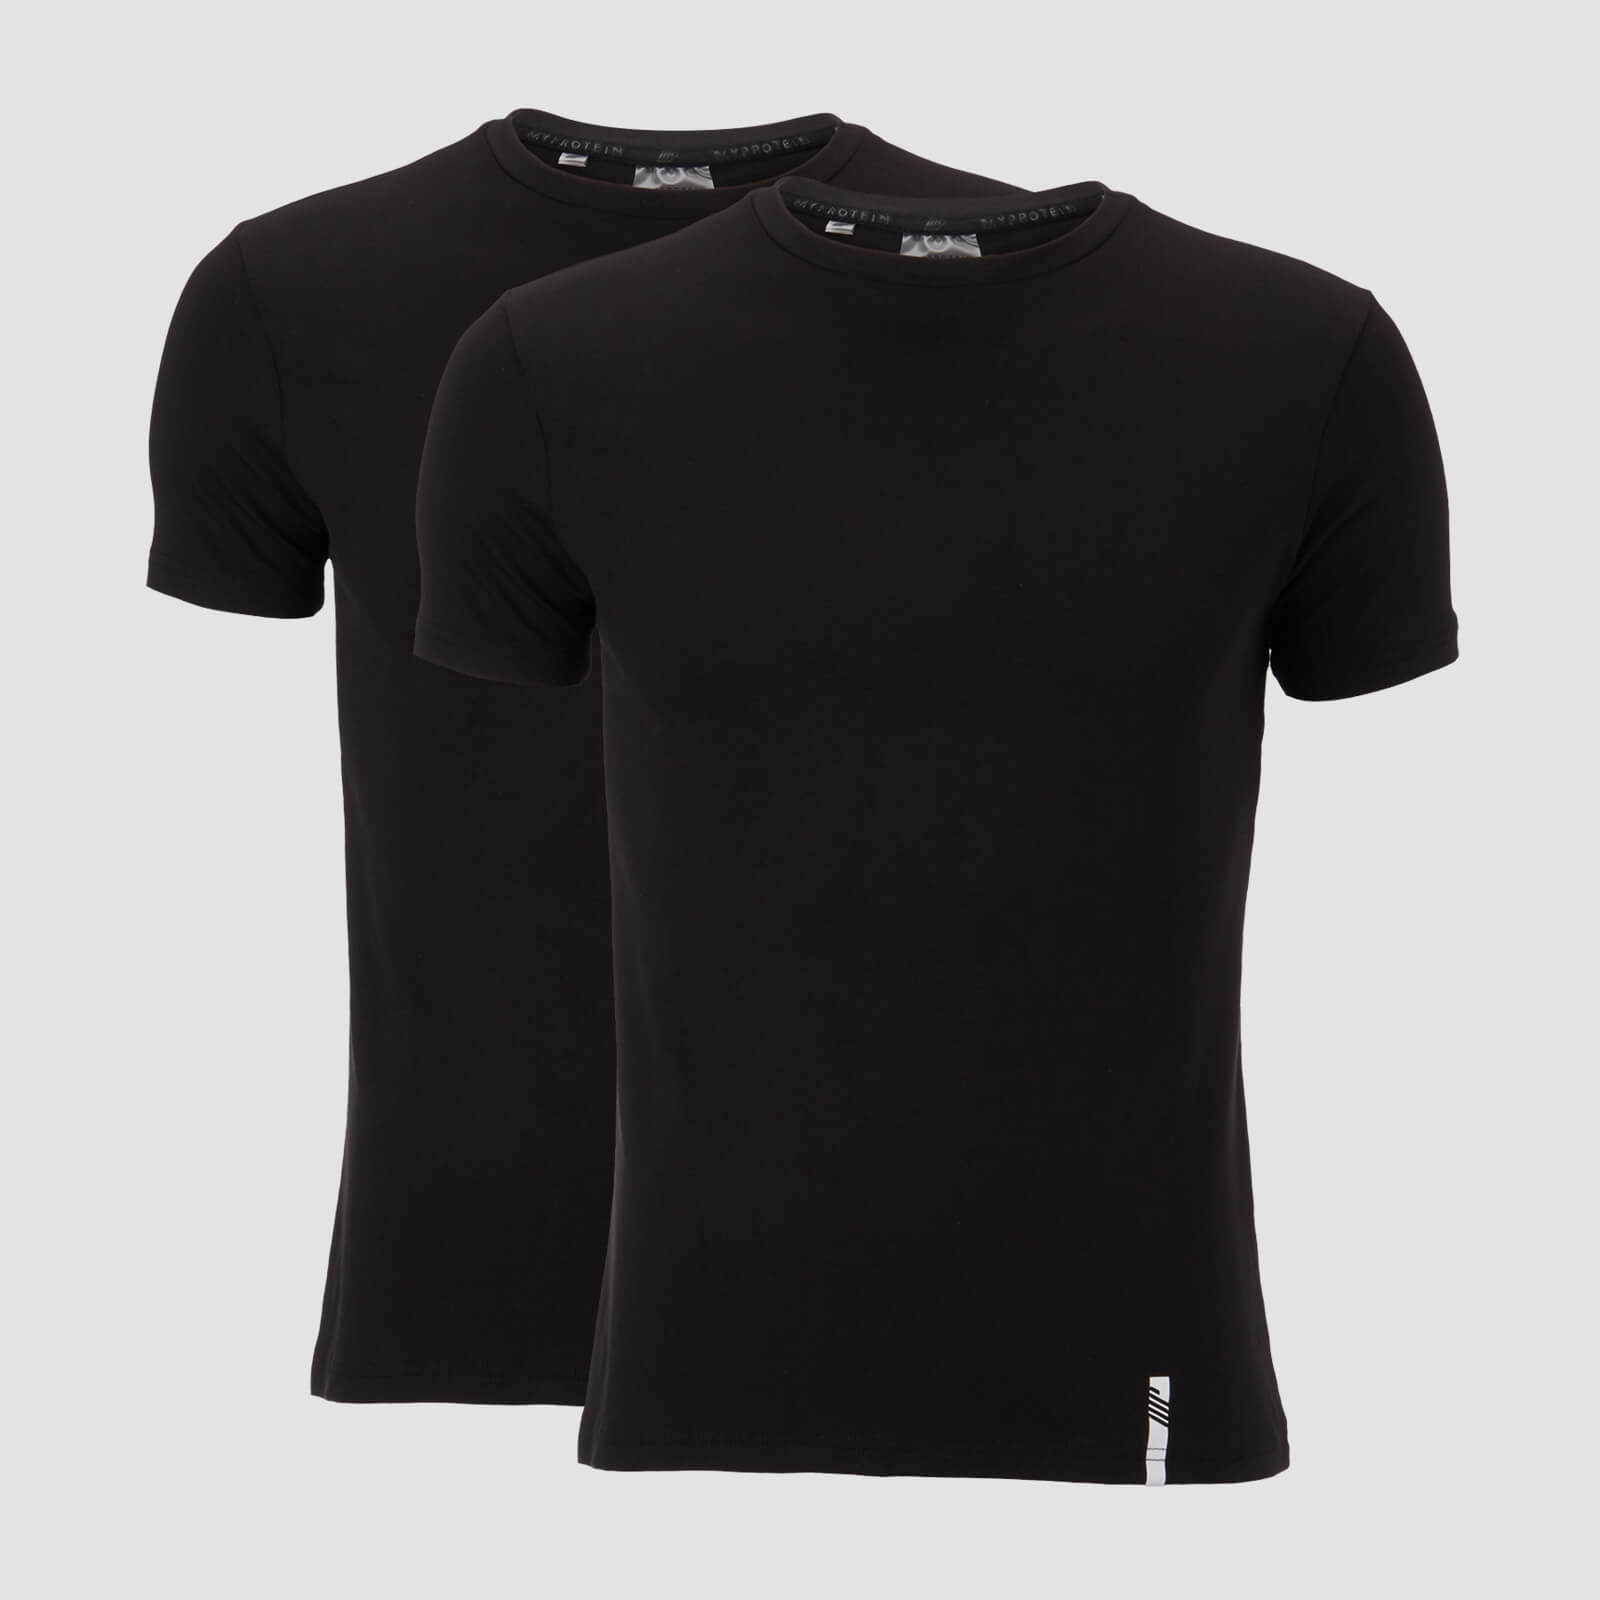 Myprotein Luxe Classic 2-Pack T-Shirt - Sort/Sort - M